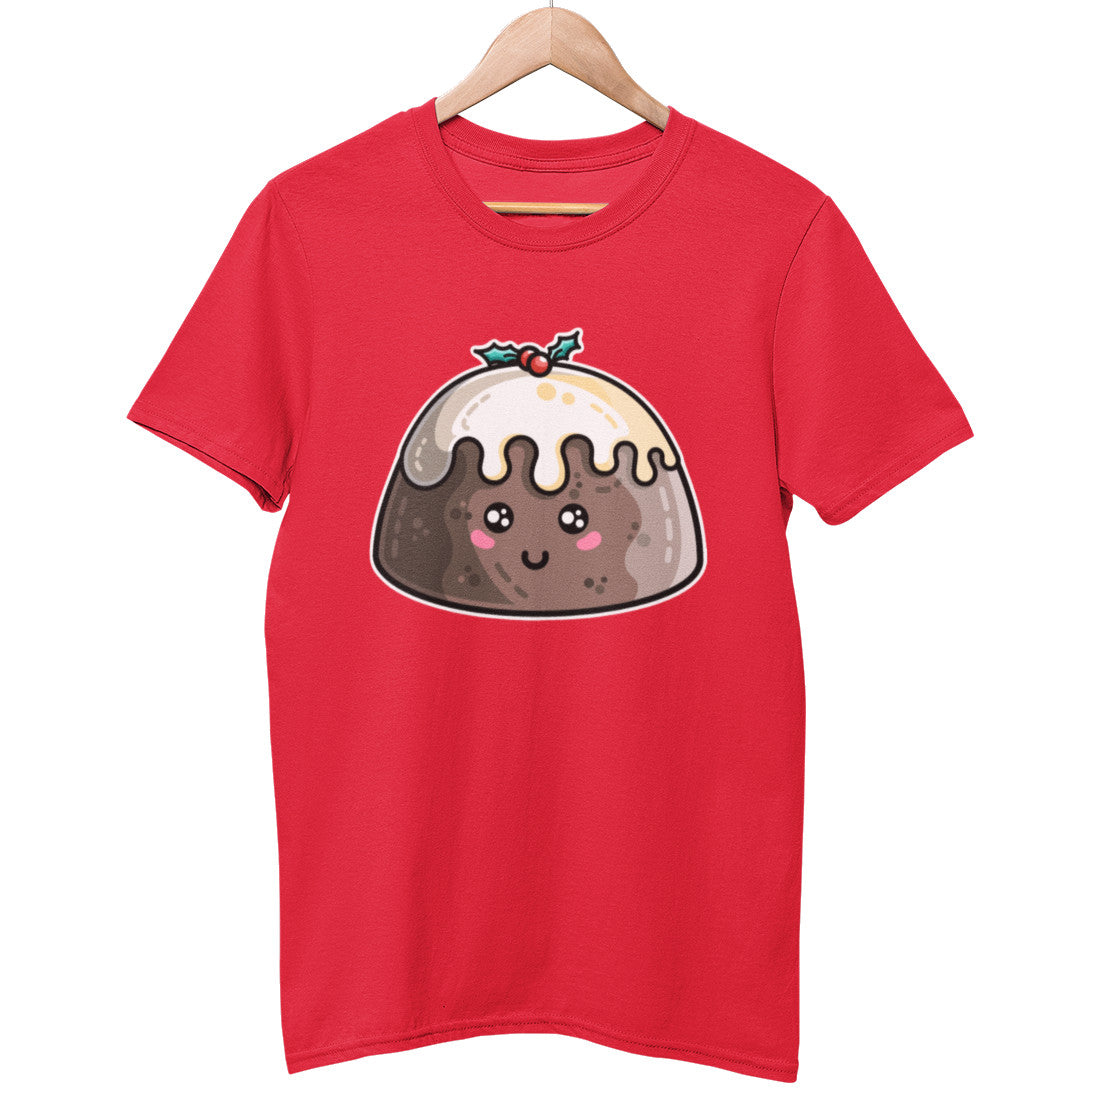 A red colour unisex crewneck t-shirt on a hanger with a design on its chest of a kawaii cute Christmas pudding with cream and a sprig of holly on the top